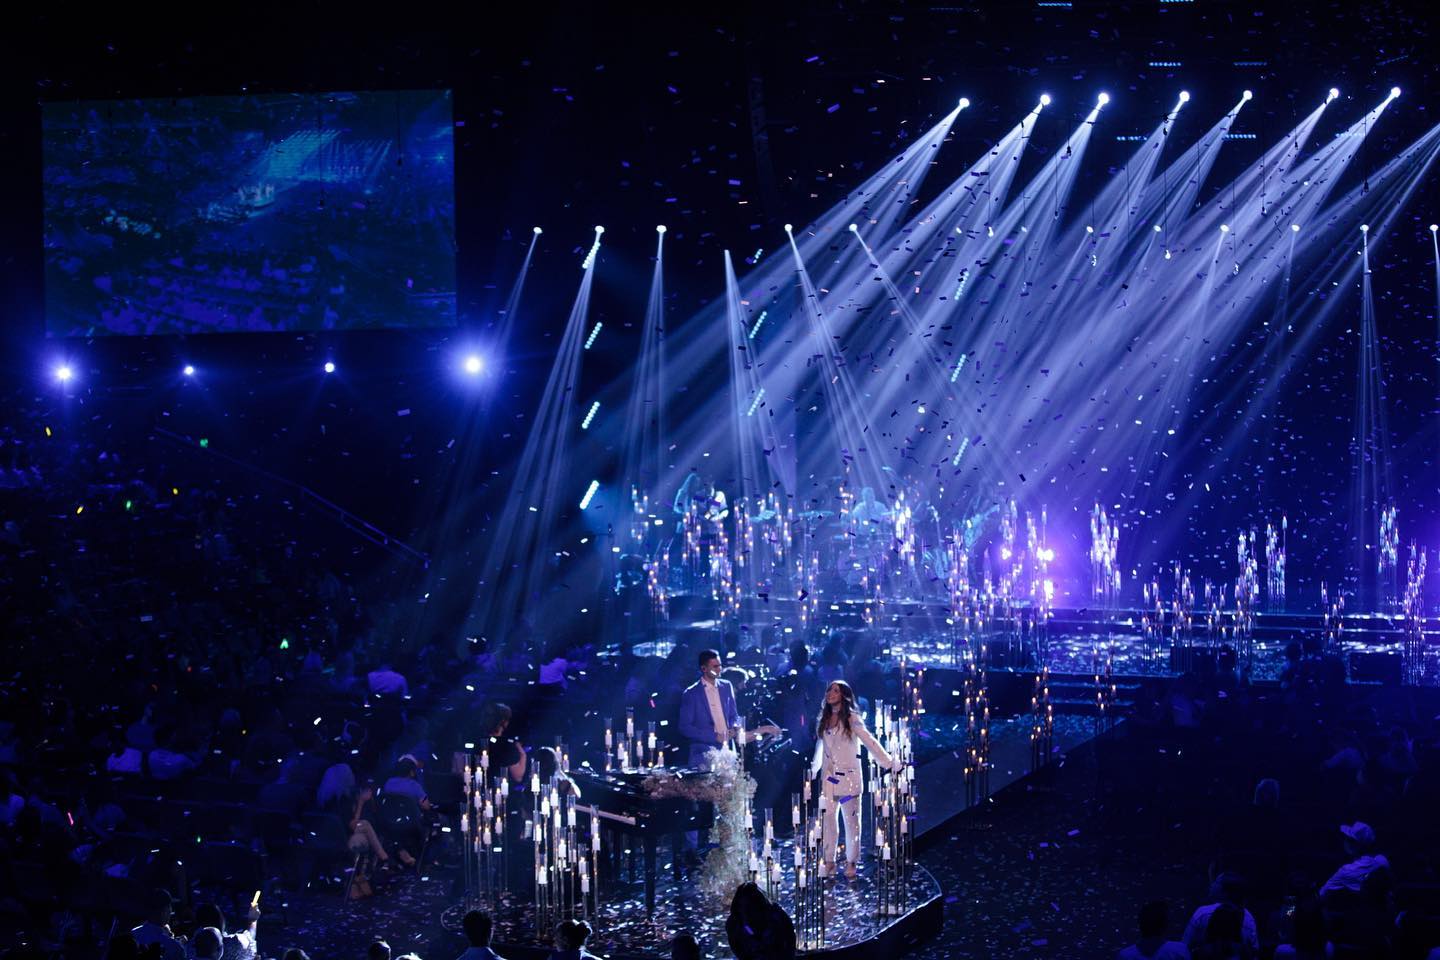 Hillsong Christmas Service Features Woman Swinging from Moon Wearing Dress Made of Mirrors+ Much More